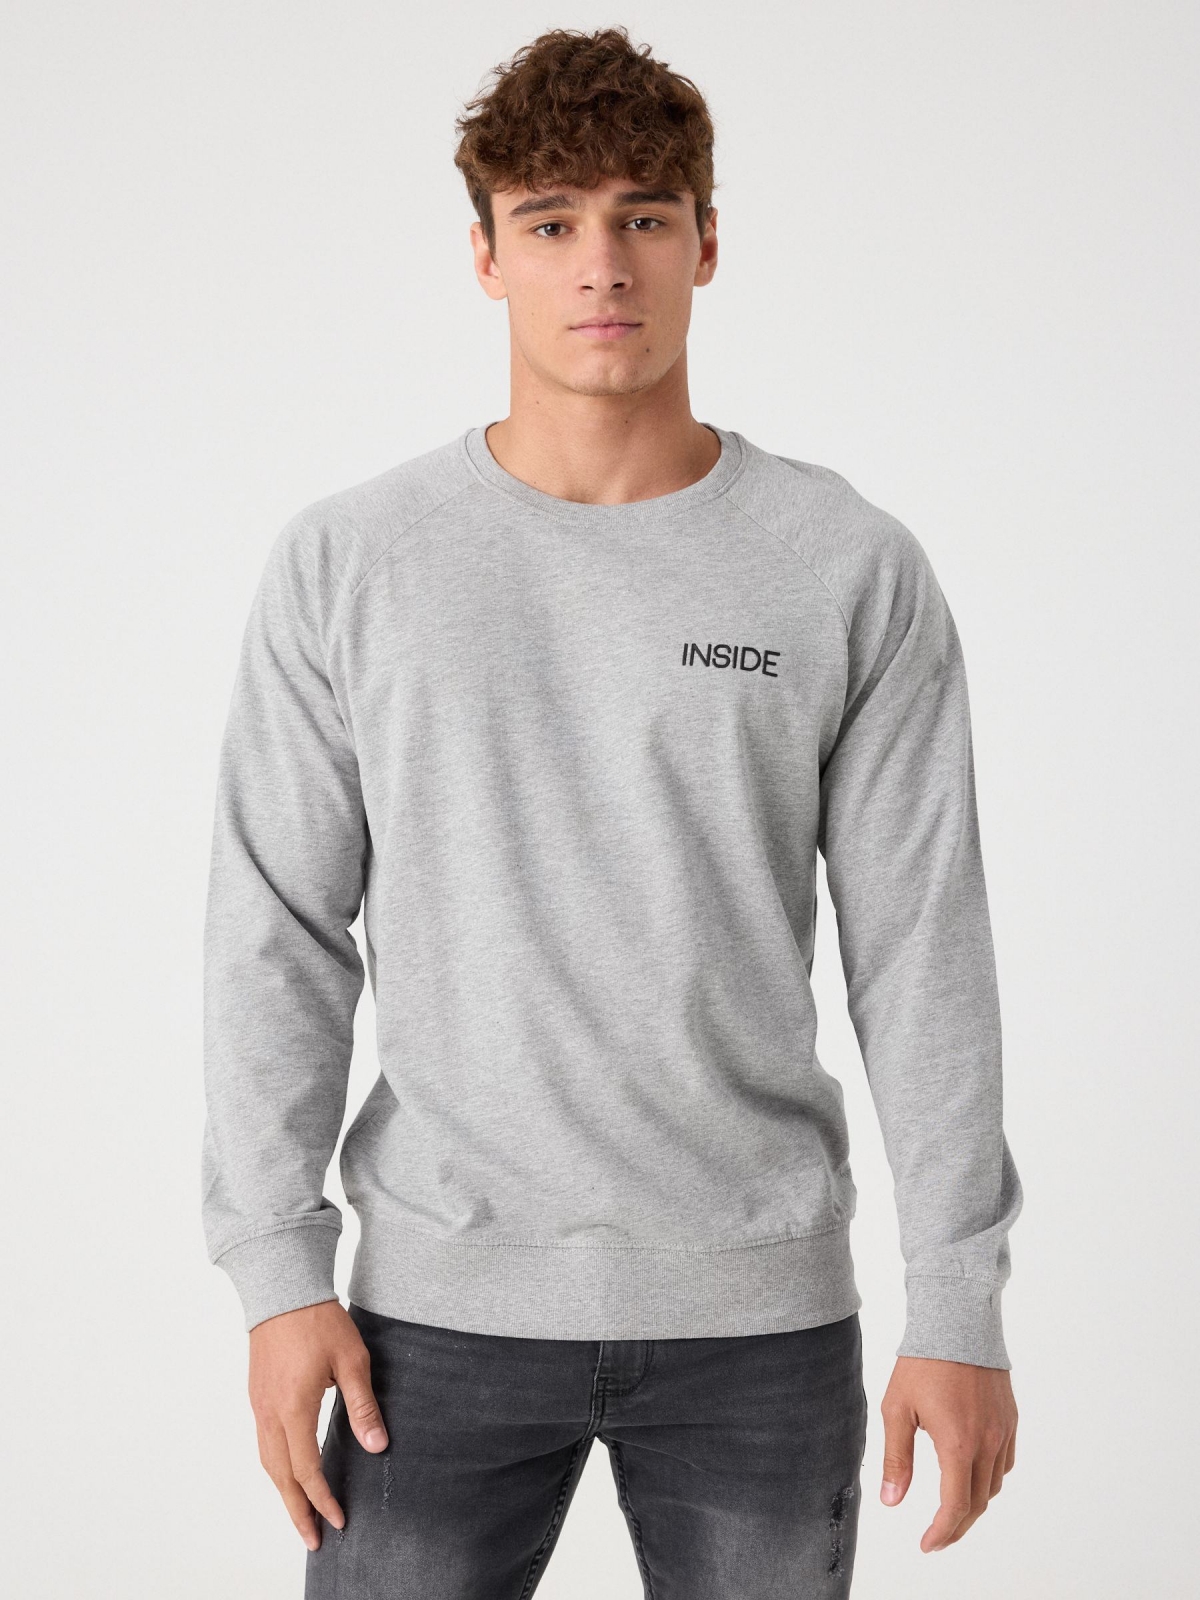 Basic sweatshirt with text melange grey middle front view